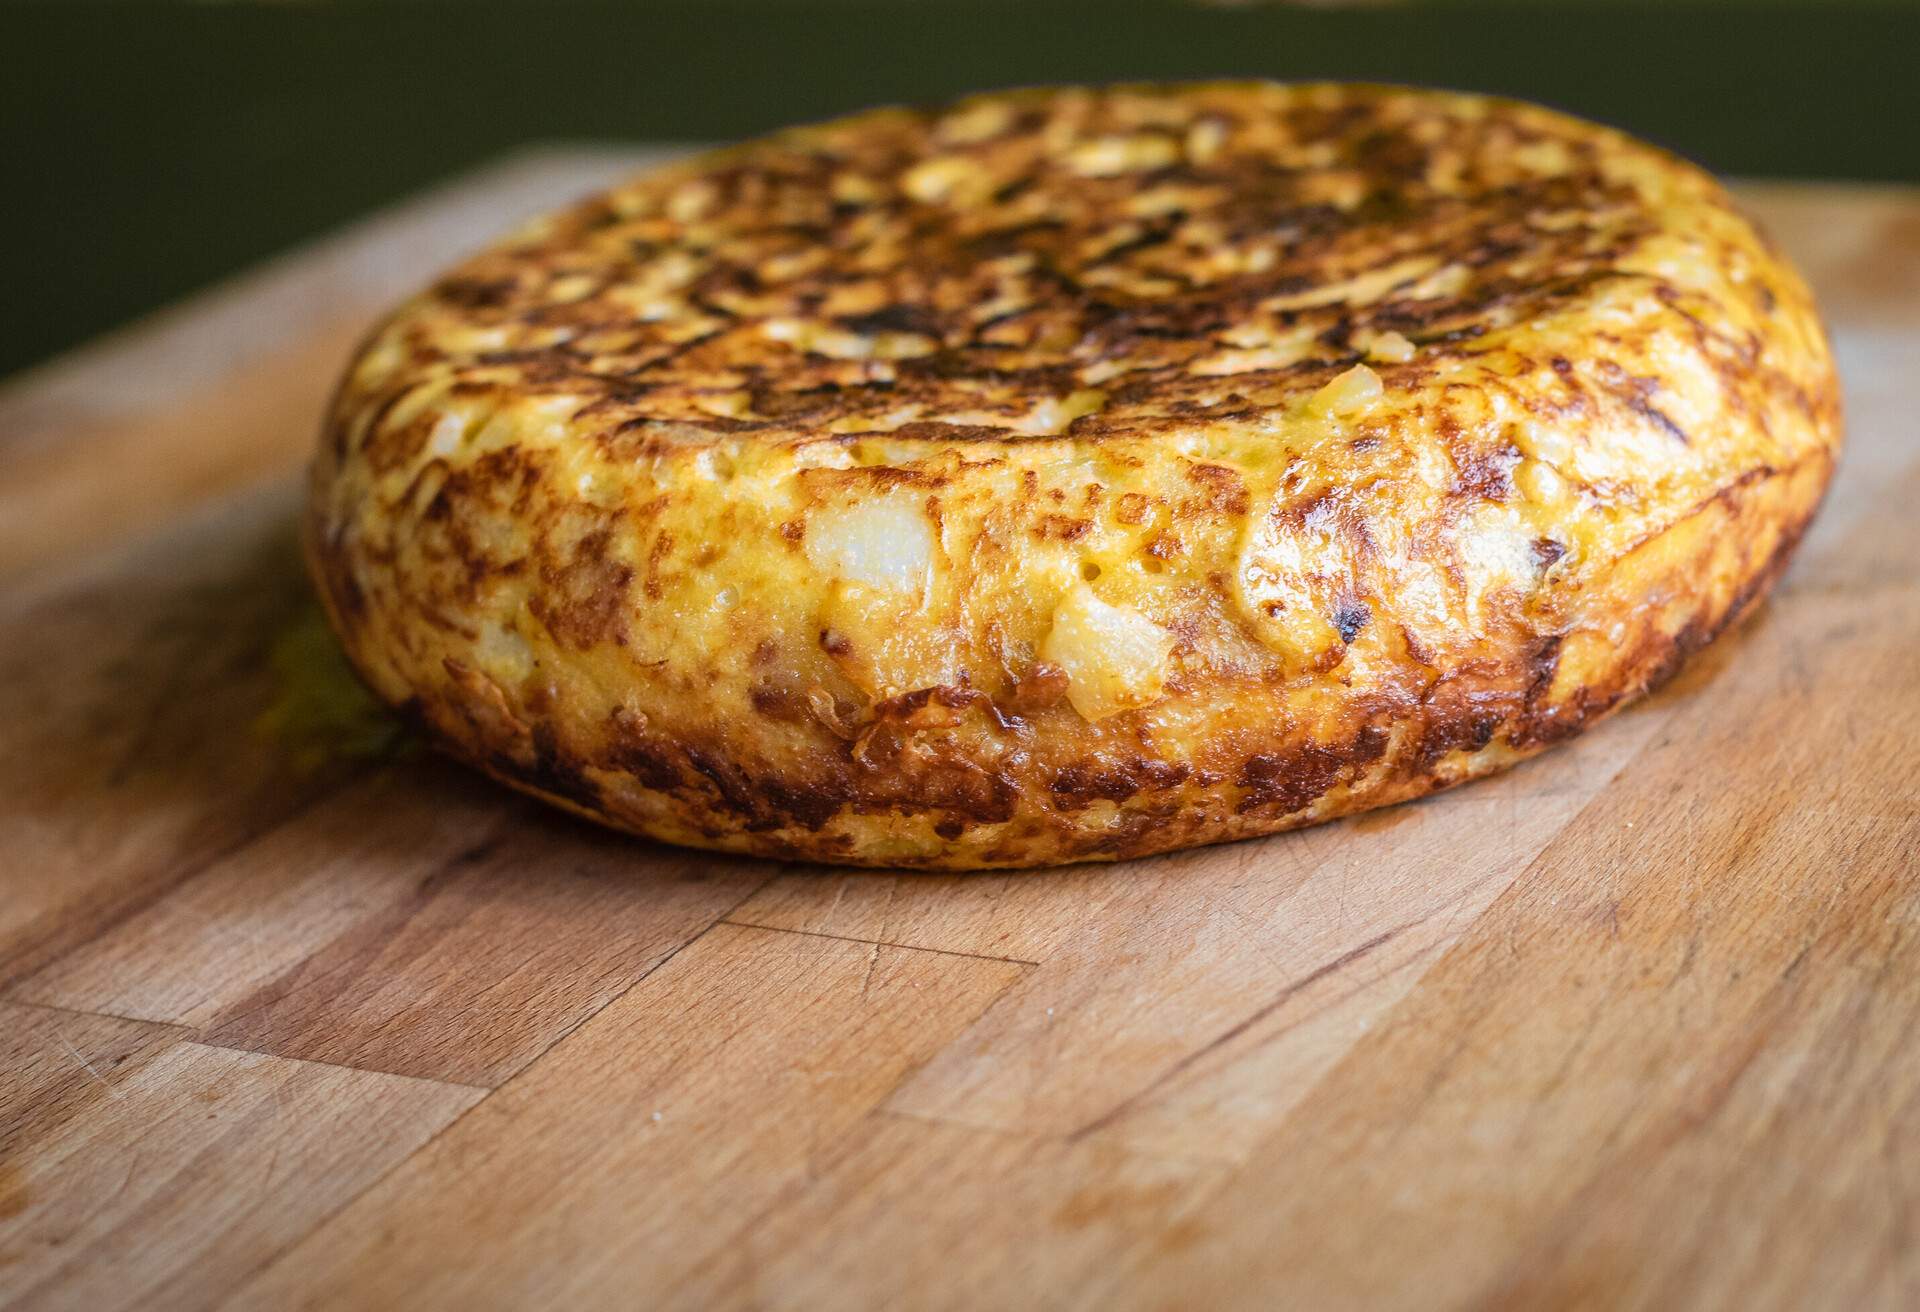 Spanish tortilla, Spanish omelette tortilla de patata. Typical traditional Spanish omelette dish or tapas with eggs, potato, onions andolive oil, served on wooden desk.